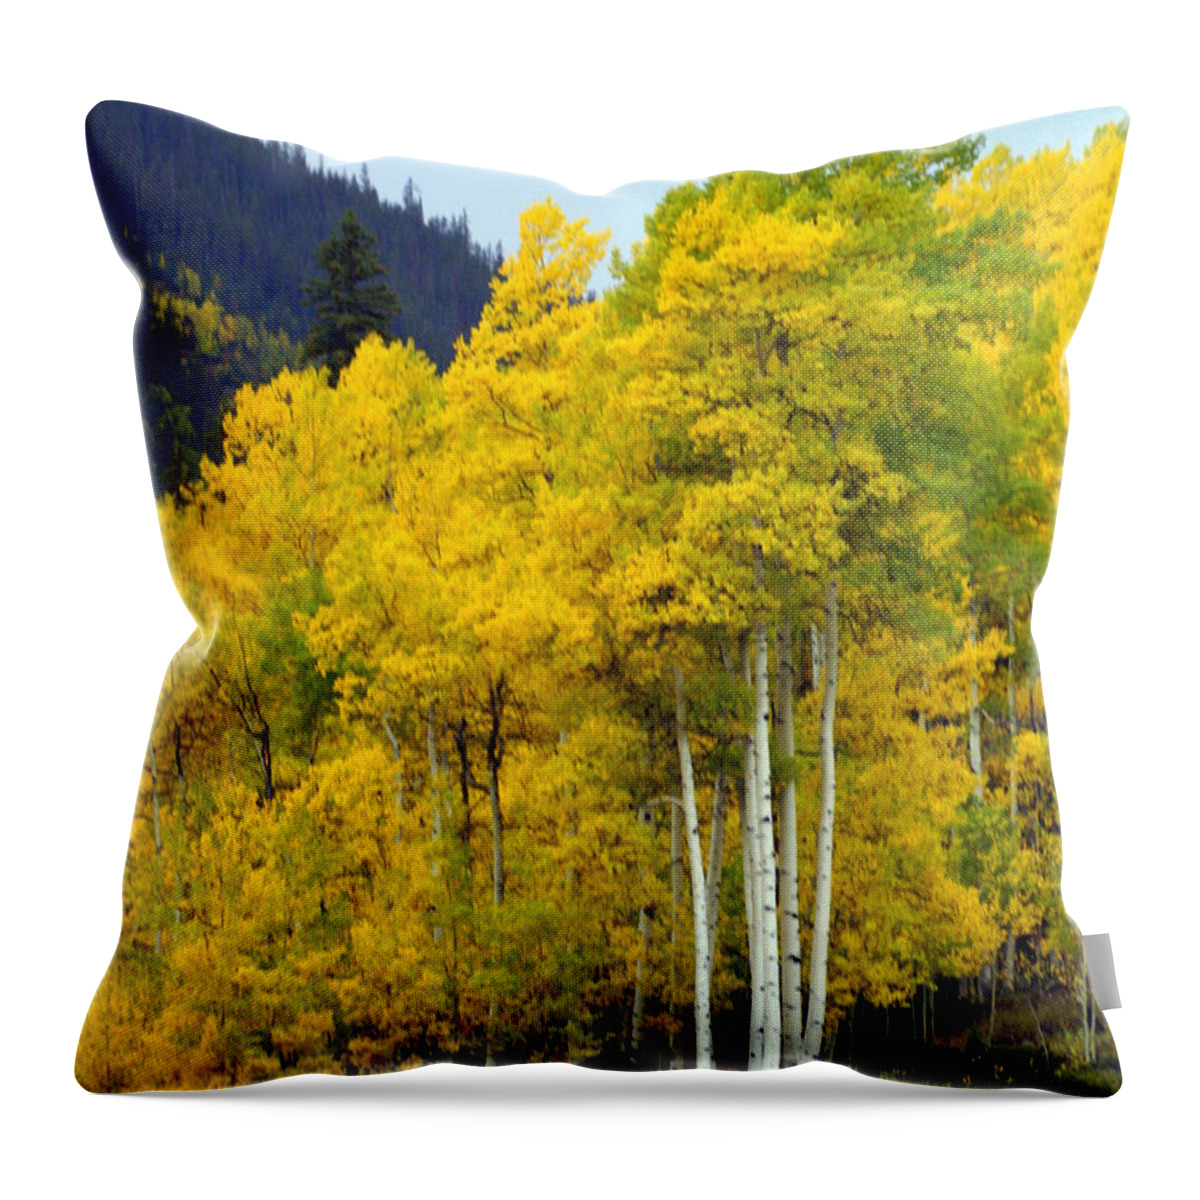 Fall Colors Throw Pillow featuring the photograph Aspen Fall by Marty Koch